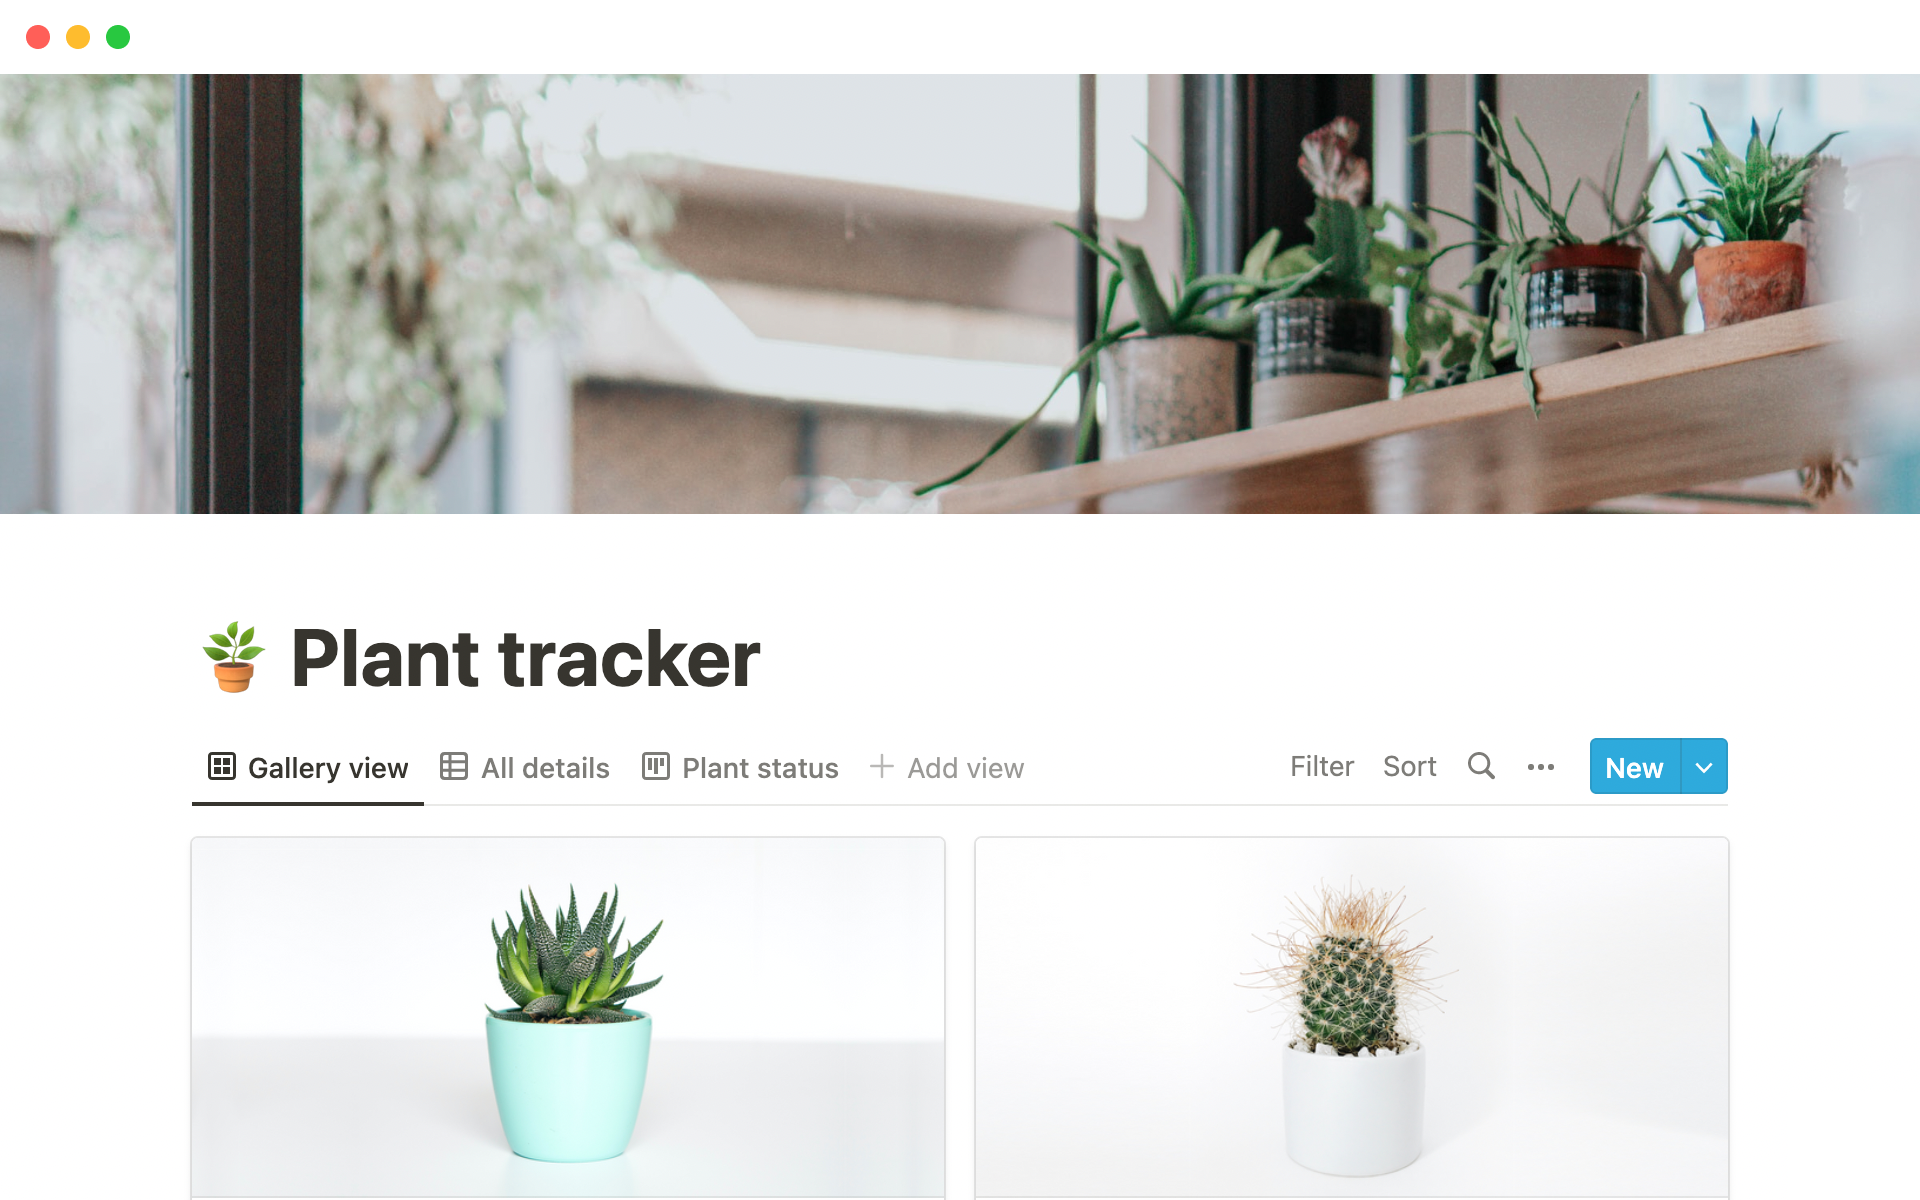 Green up your thumb with this handy plant tracker.